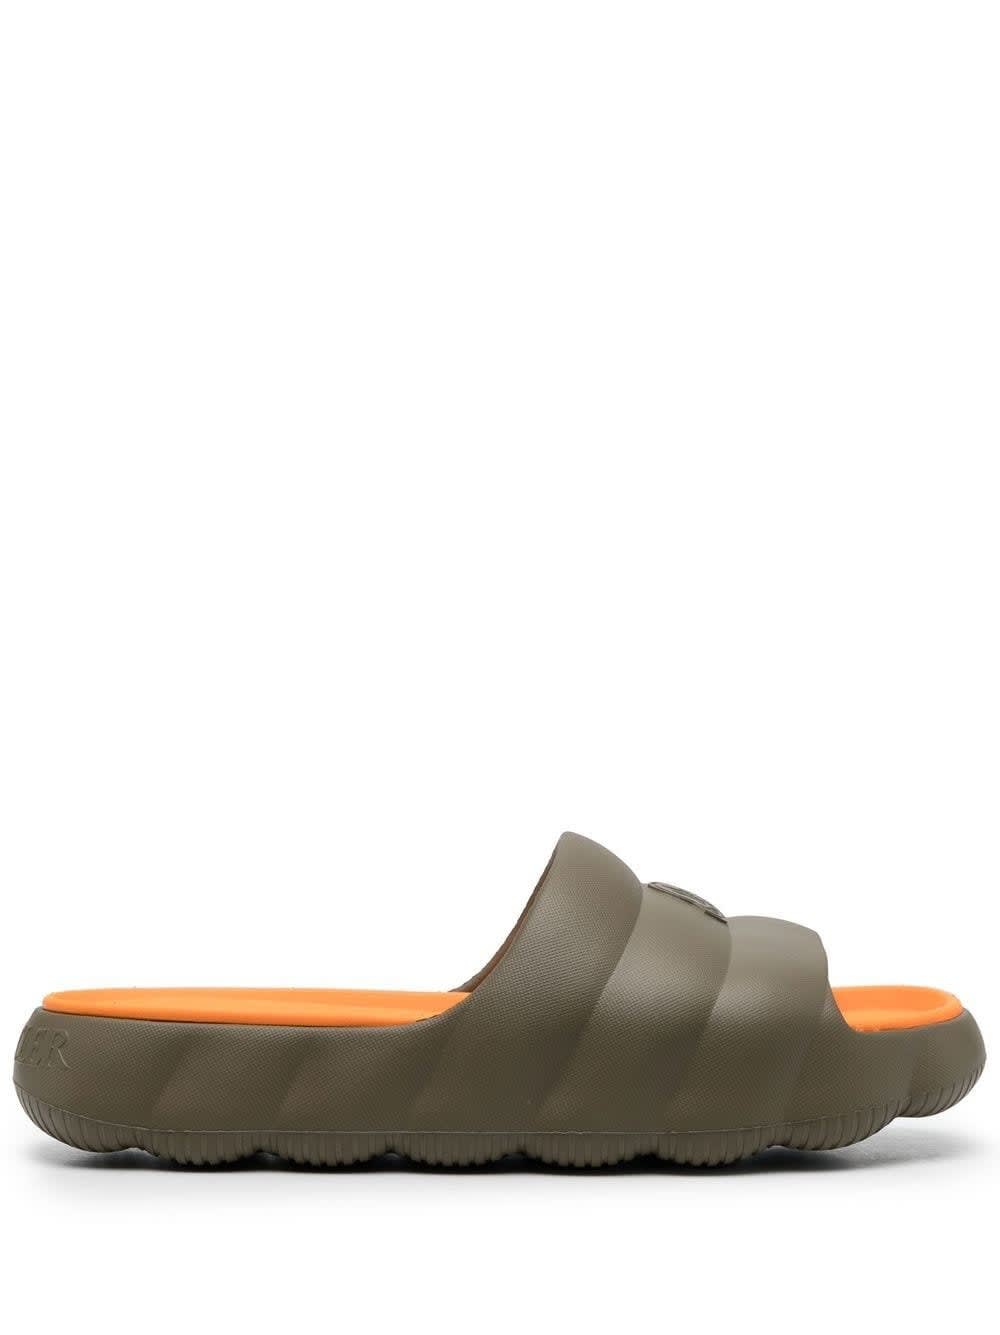 MONCLER ORANGE AND MILITARY GREEN LILO SLIDES